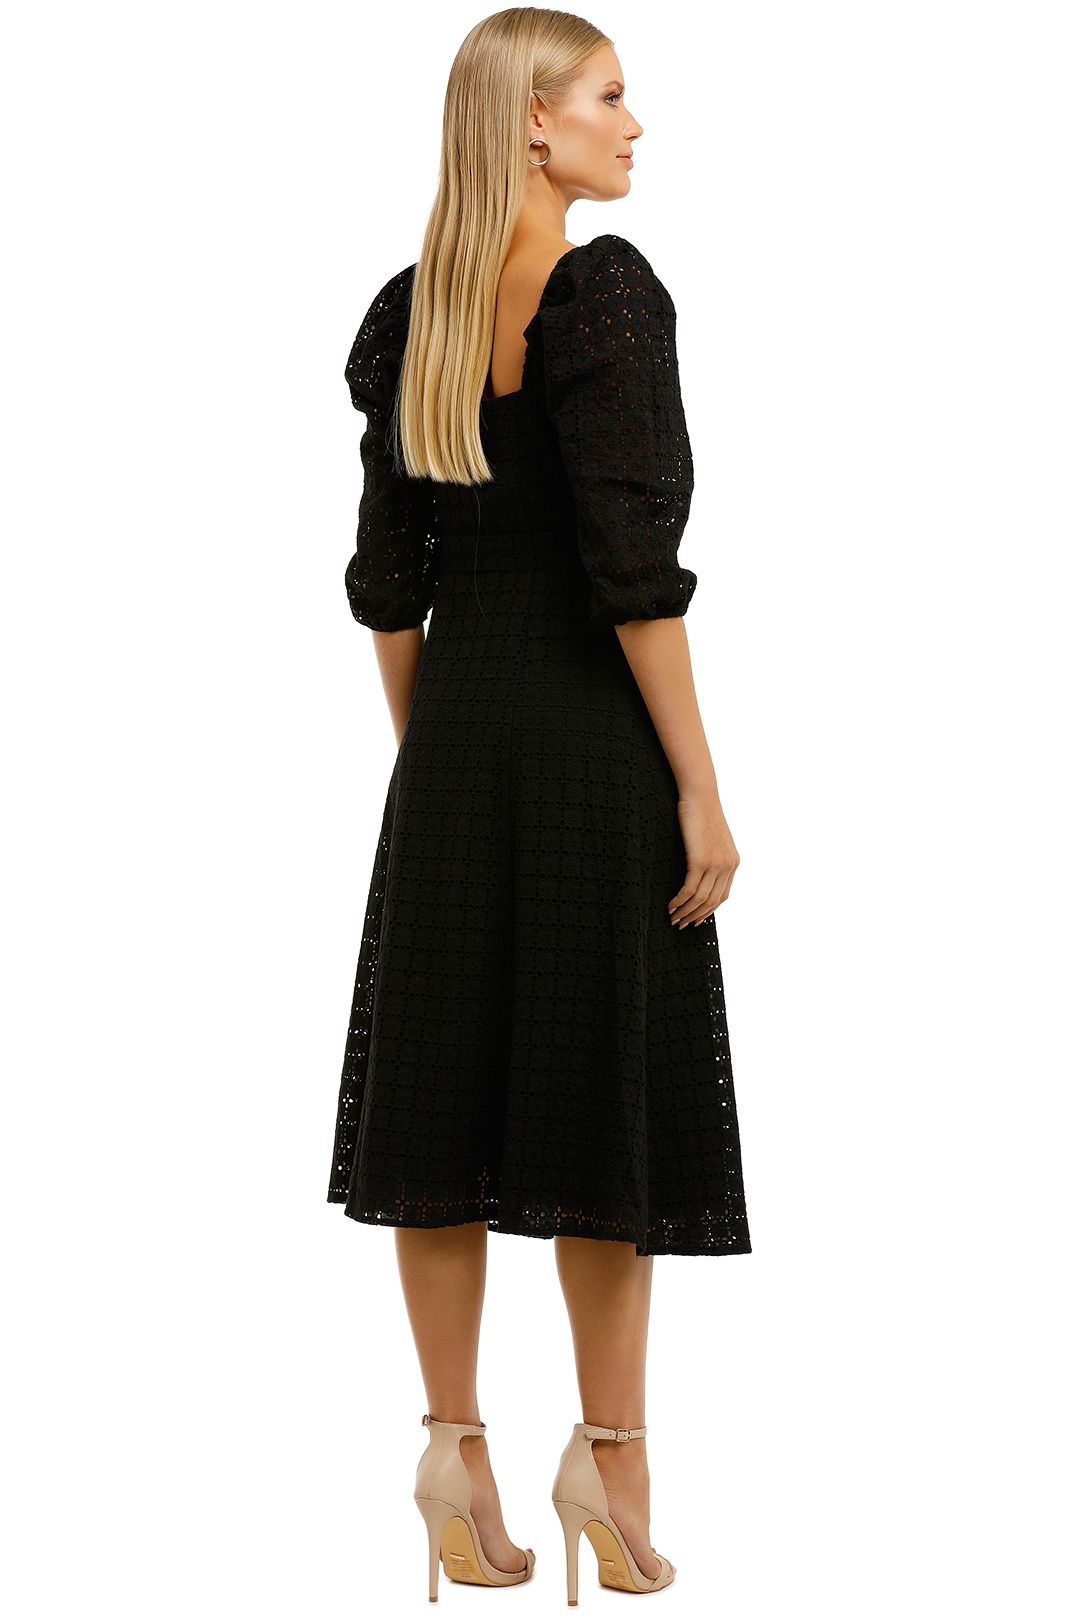 We-Are-Kindred-Vienna-Midi-Dress-Noir-Back